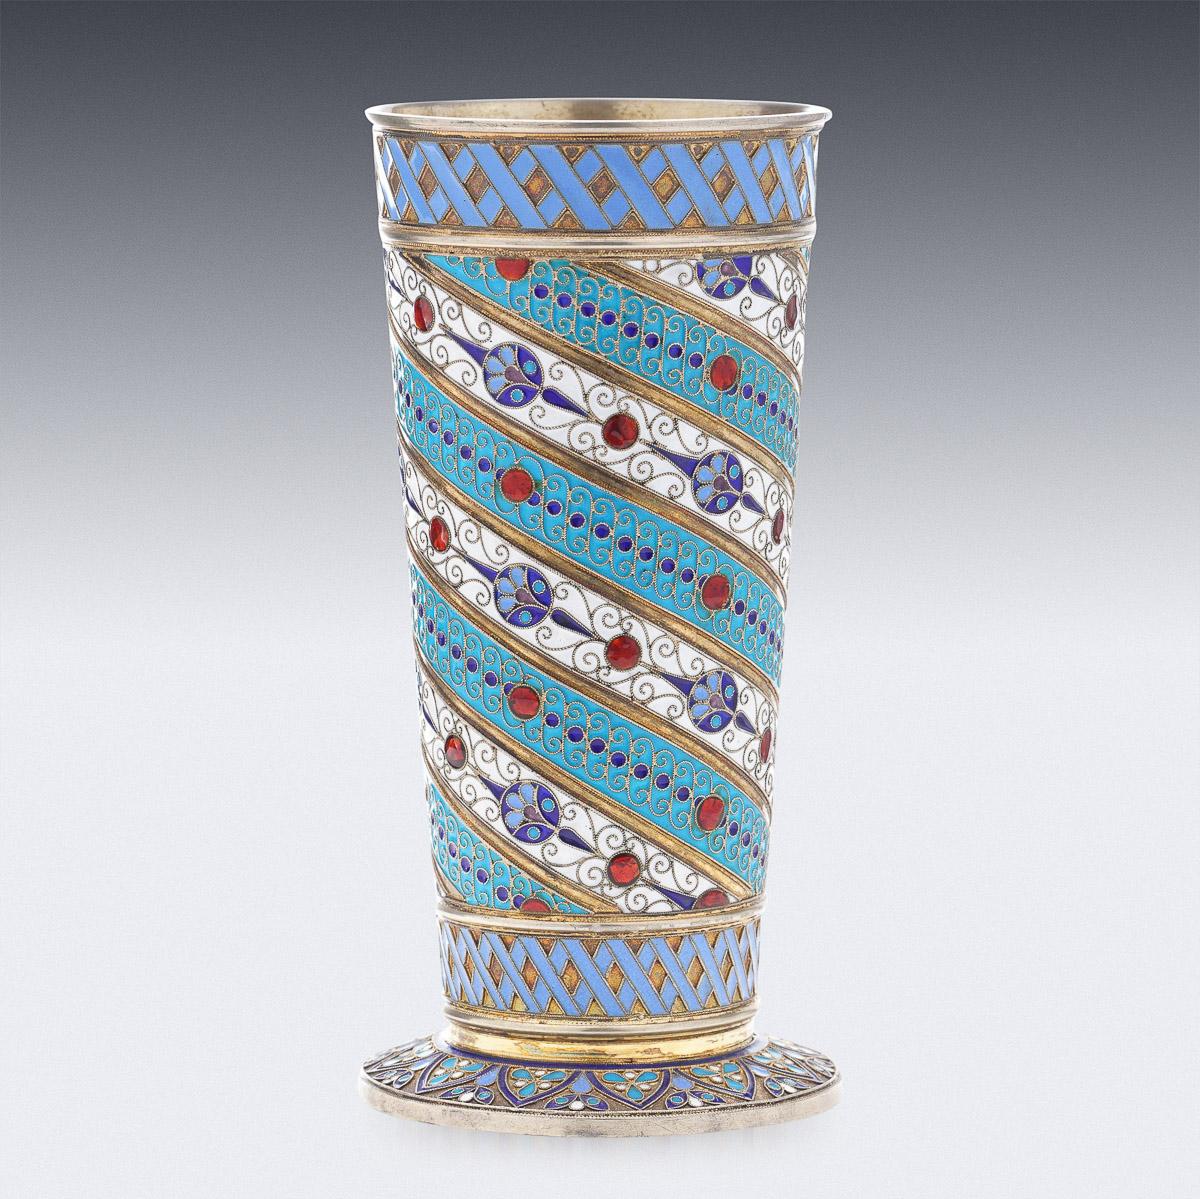 19th Century Imperial Russian silver-gilt & cloisonné enamel beaker, designed upright with a spreading foot, the body profusely decorated with floral motifs in vary-coloured cloisonné enamel within cross-hatch borders boarders.
Hallmarked Russian